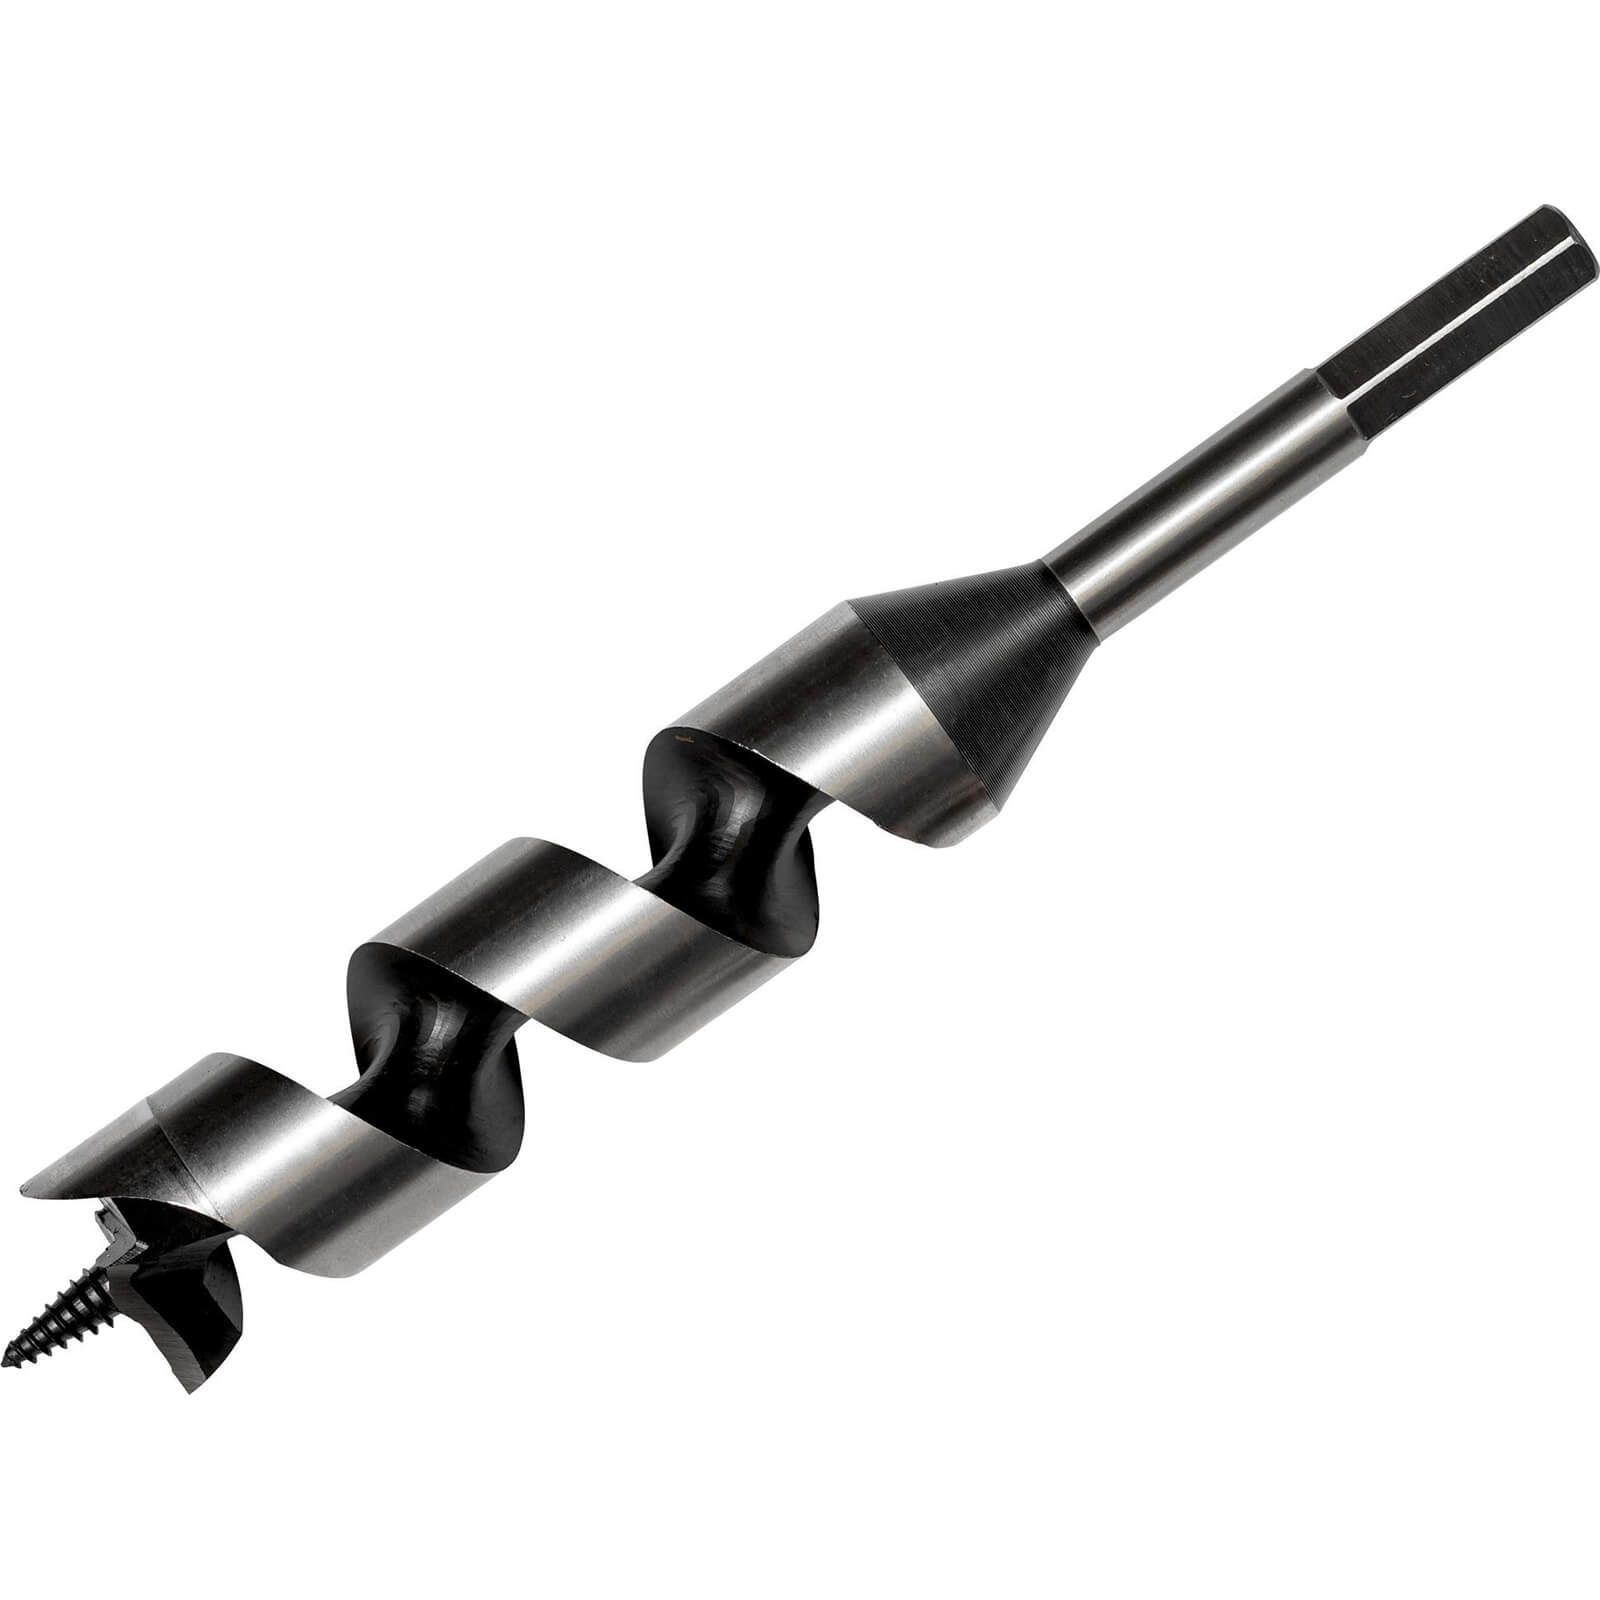 Image of Bahco 9626 Series Combination Auger Drill Bit 7mm 230mm